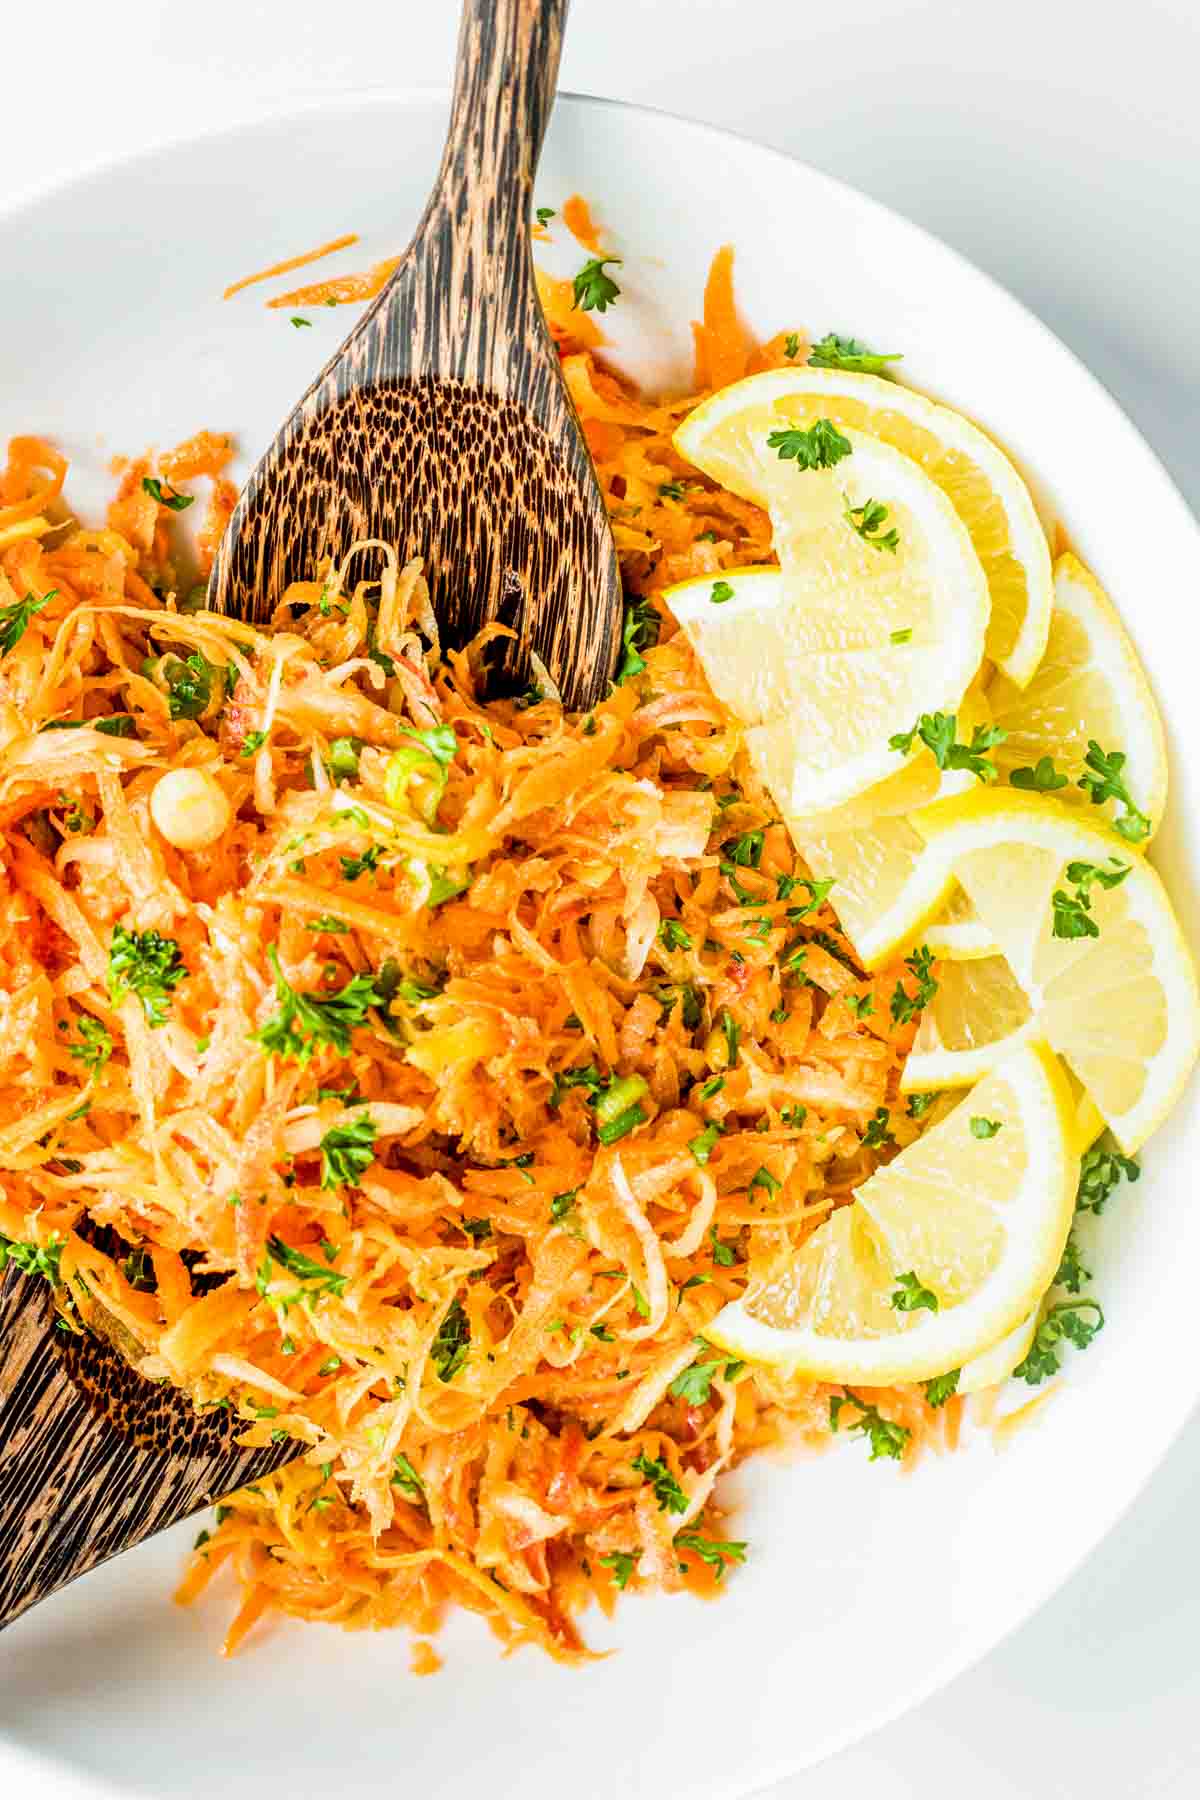 A plate of shredded carrot salad garnished with lemon slices and parsley, served with wooden utensils.